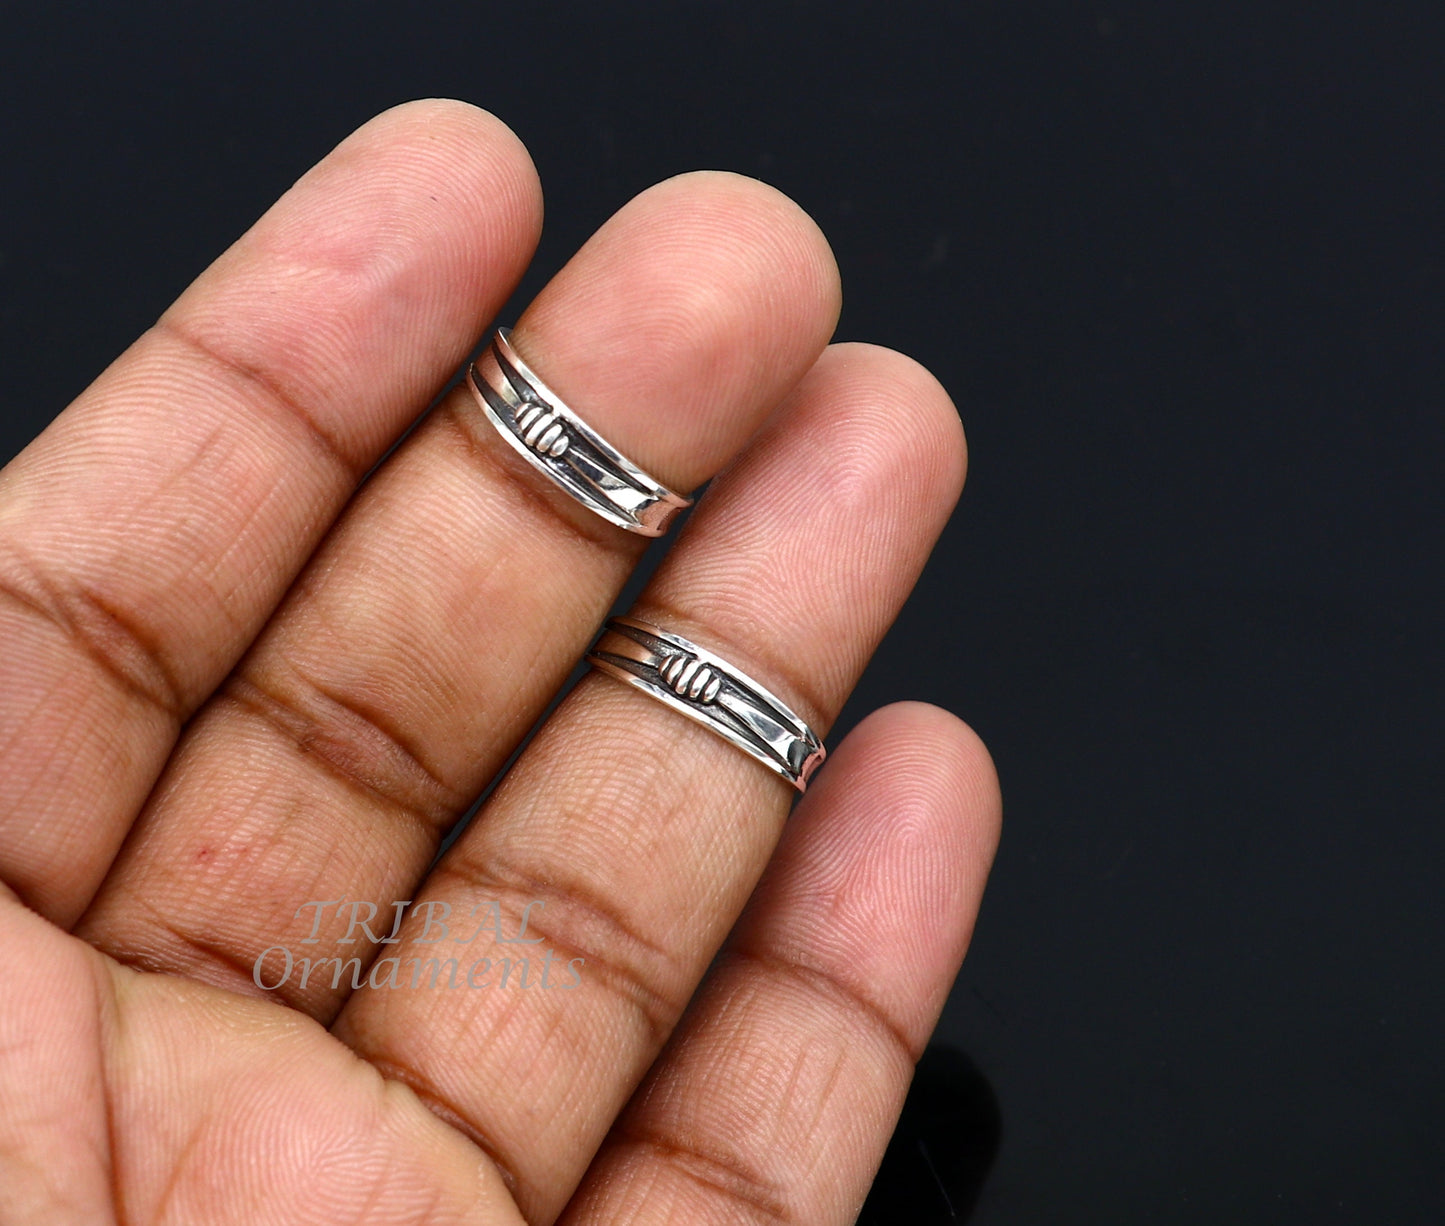 92.5 sterling silver handmade stunning vintage design Adjustable toe ring ethnic tribal belly dance jewelry india YTR01 - TRIBAL ORNAMENTS